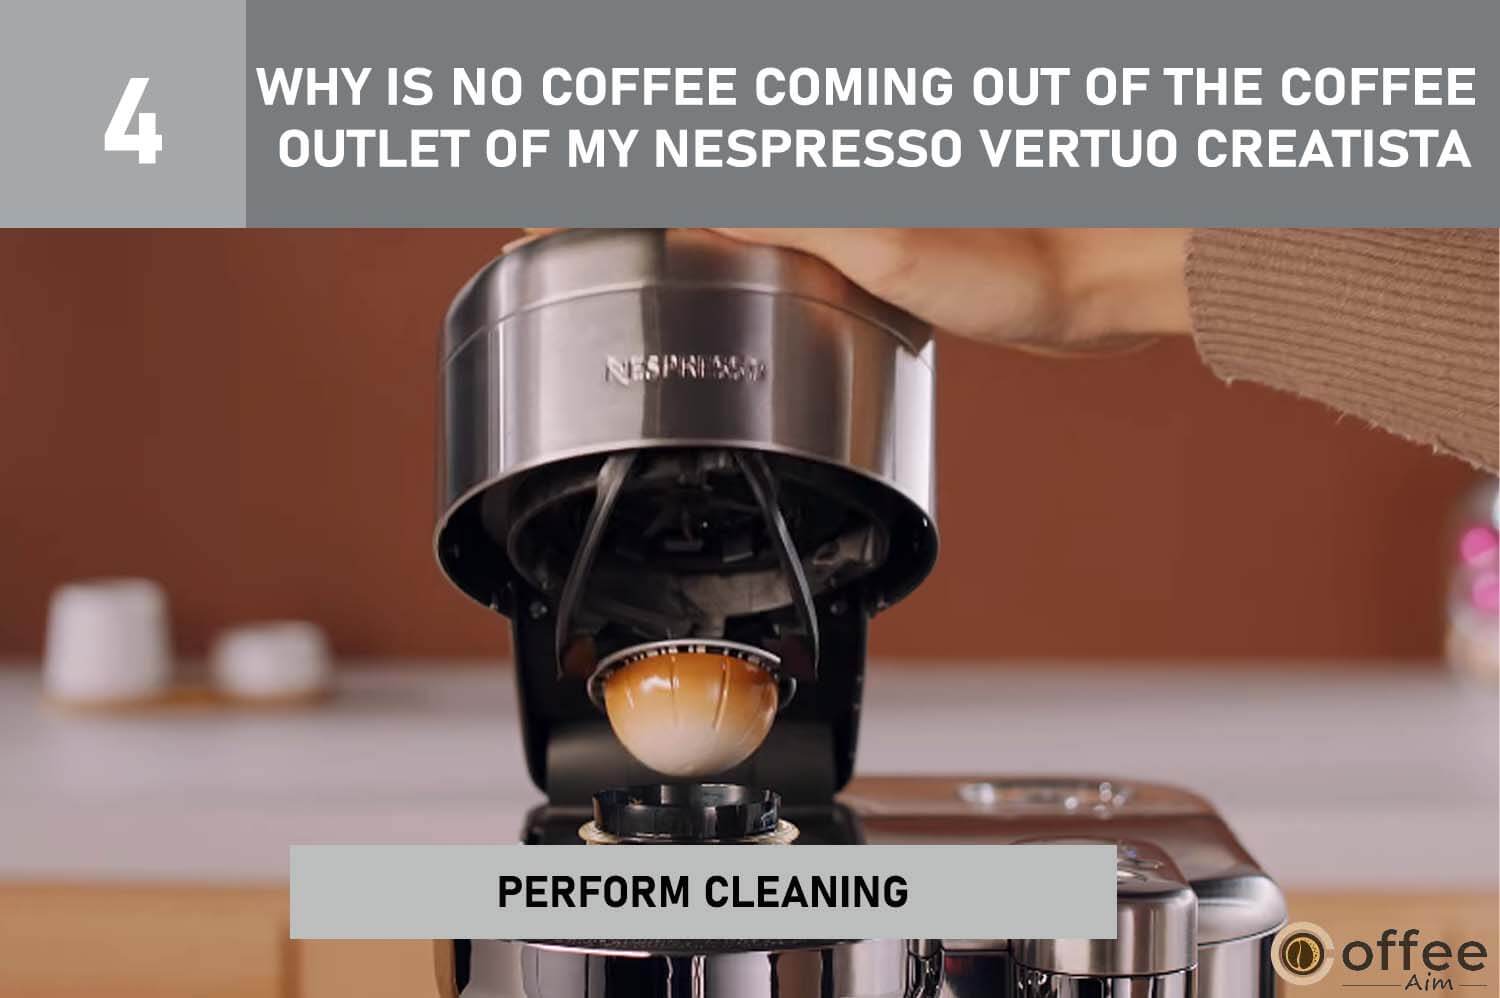 The image shows how to clean the Nespresso Vertuo Creatista coffee outlet, crucial for fixing it. 